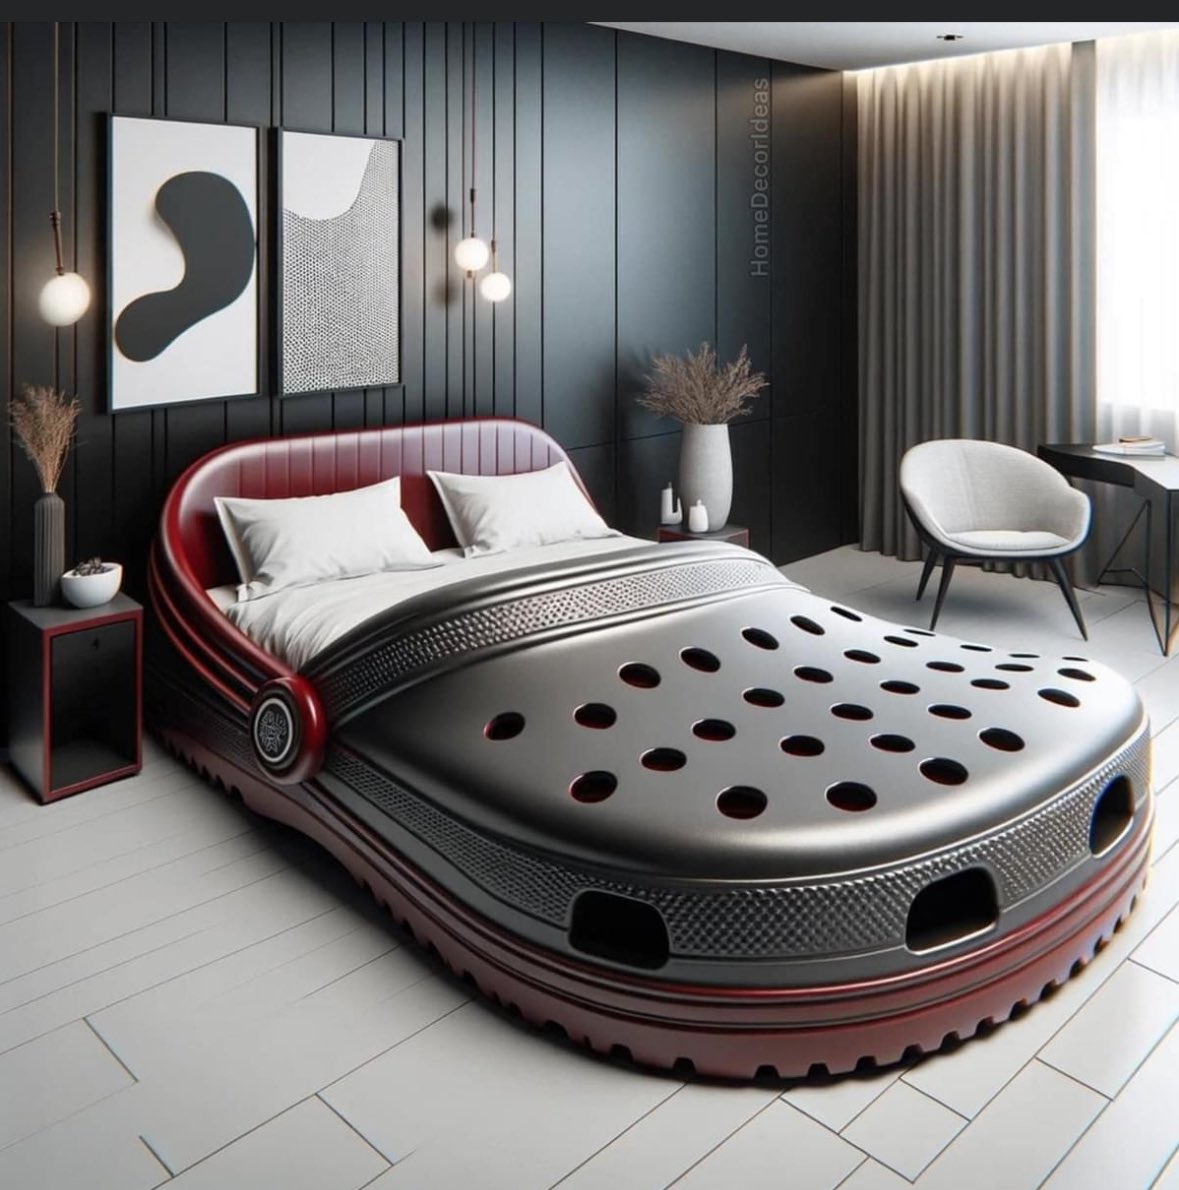 Be honest... Would you sleep in this bed?